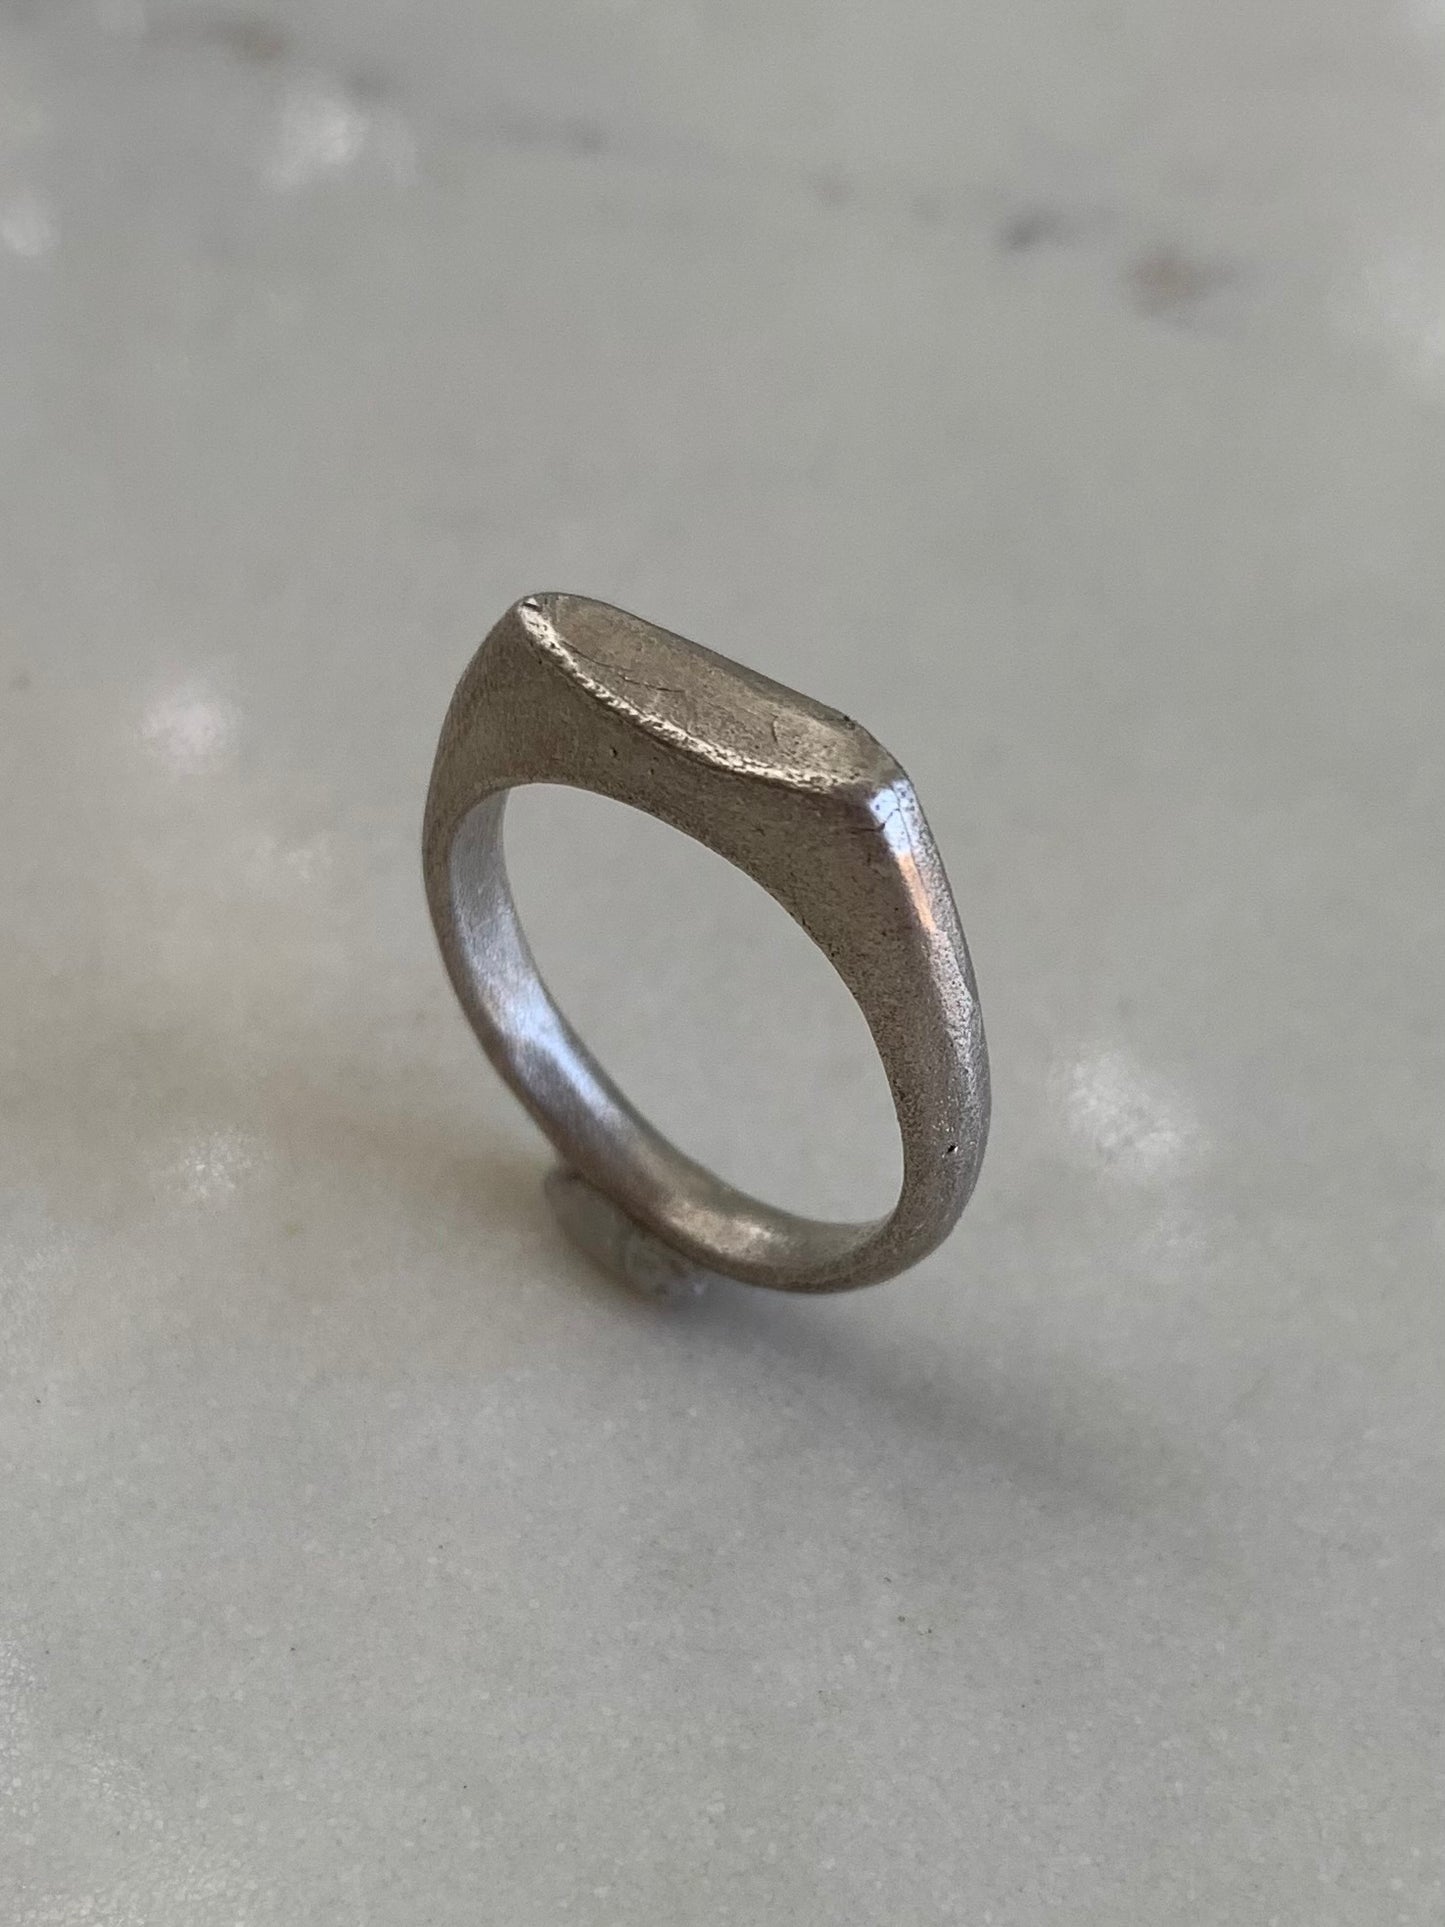 Arching signet ring